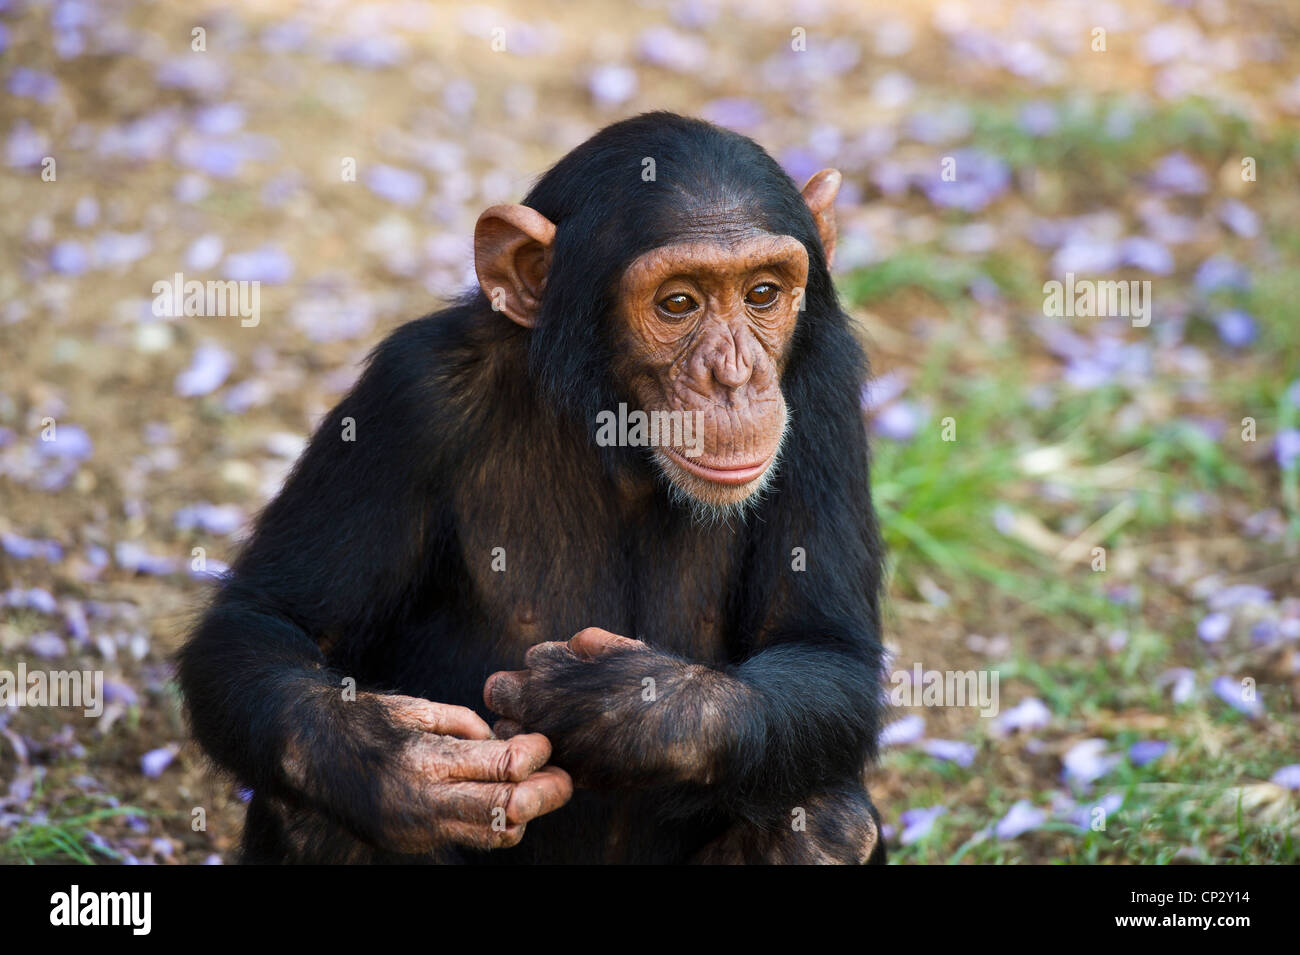 A young chimpanzee sitting on the ground among fallen flowers. Stock Photo